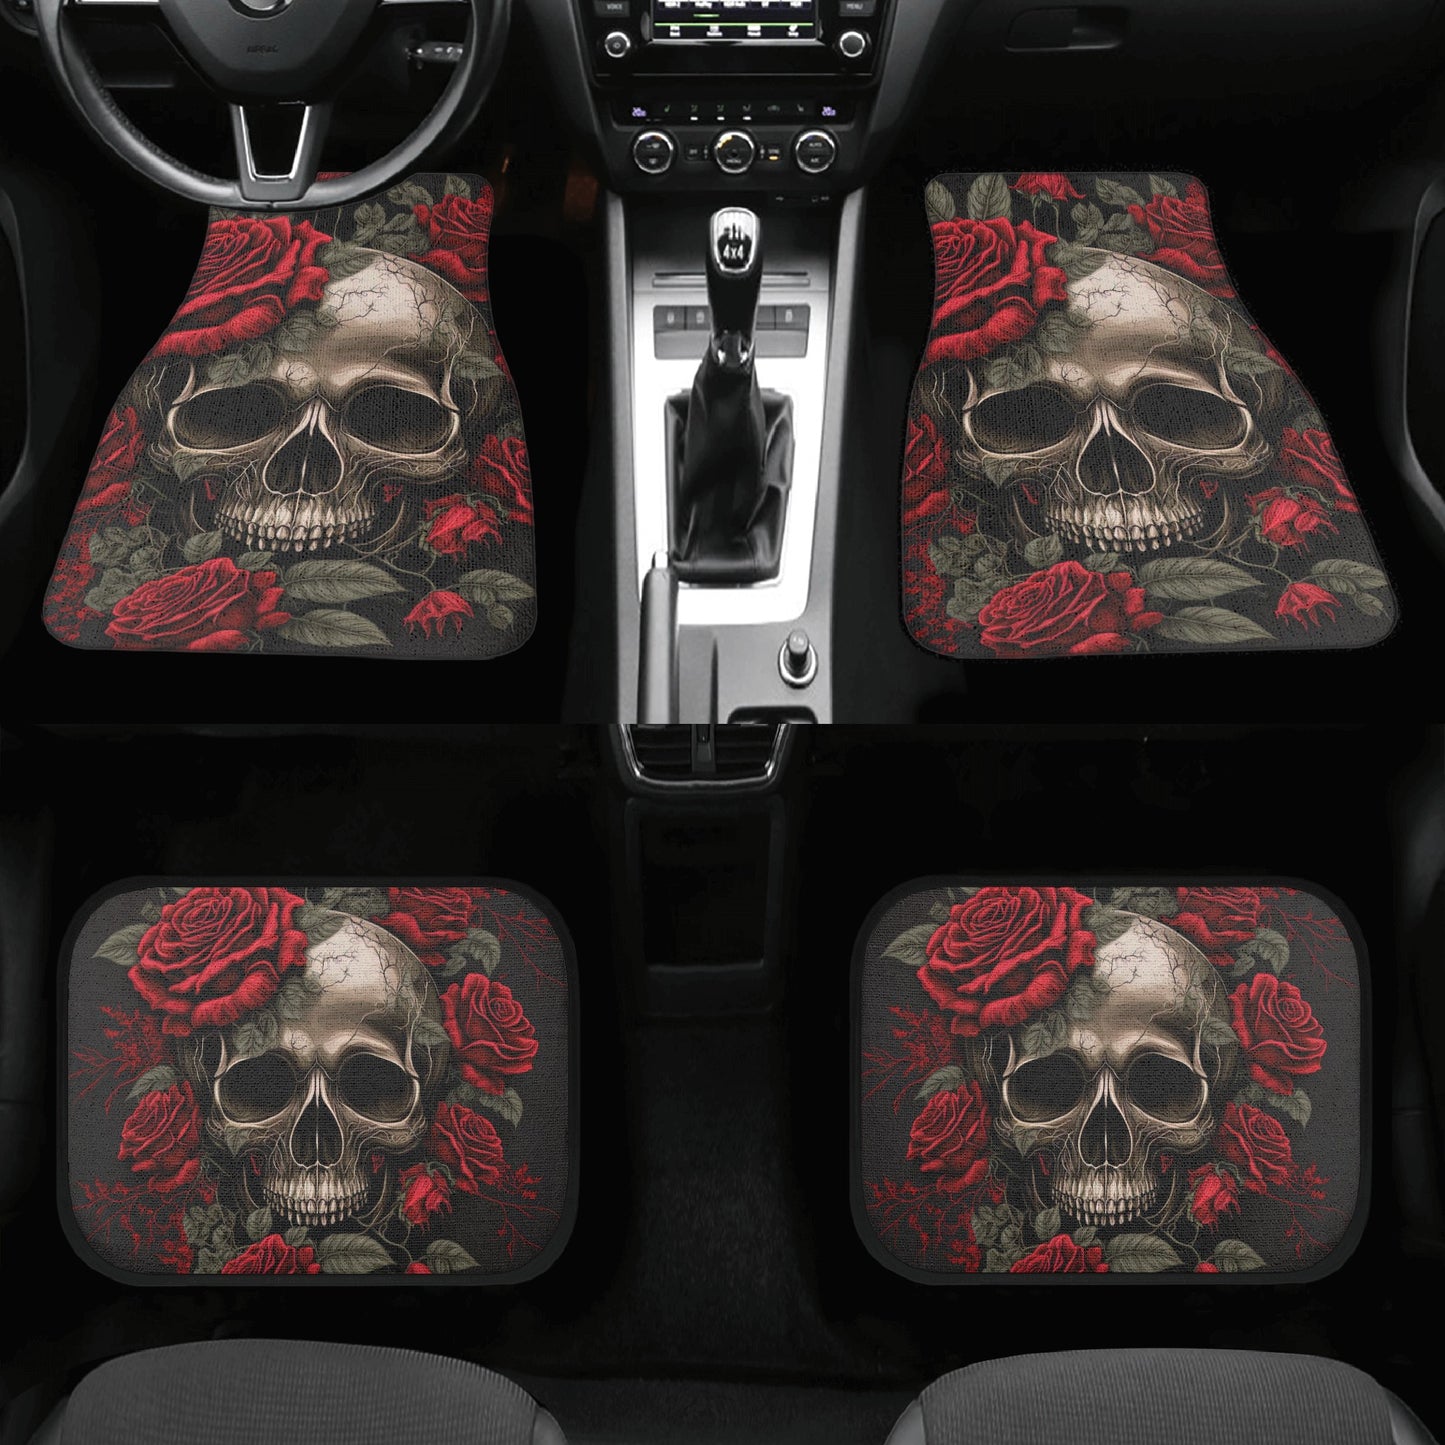 Goth seat cover for car, gothic skull car mat, flower skull front and back car seat covers, flower skull car accessories Back and Front Car Floor Mats